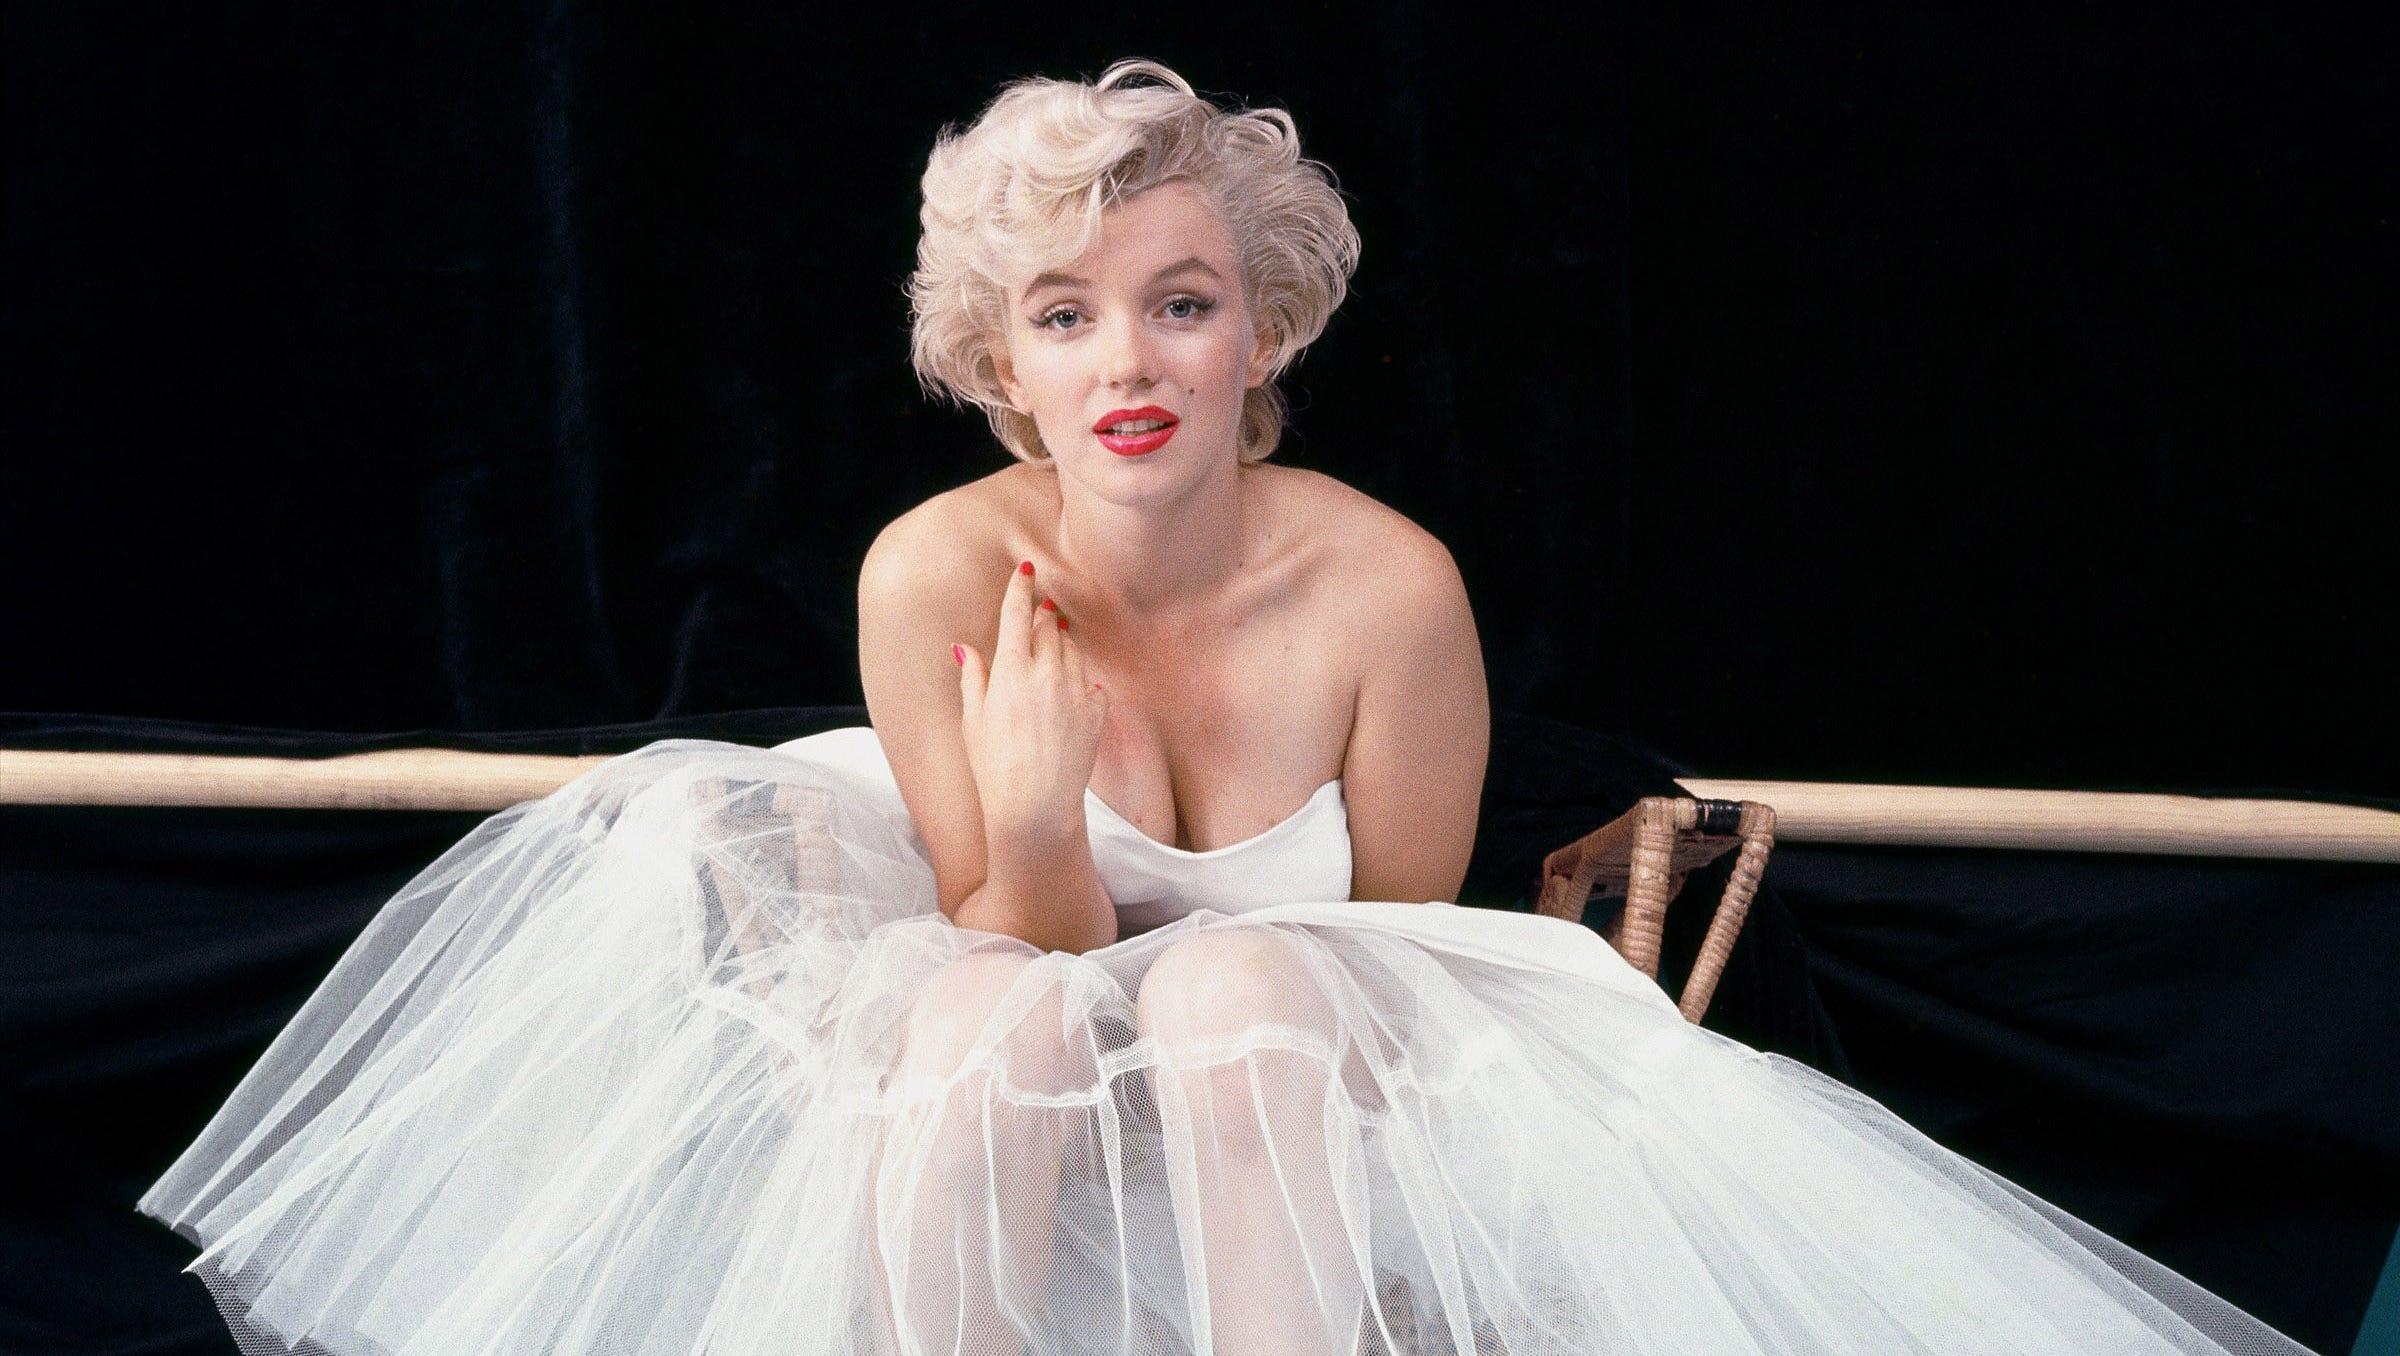 Story of Marilyn Monroe's Iconic Legacy